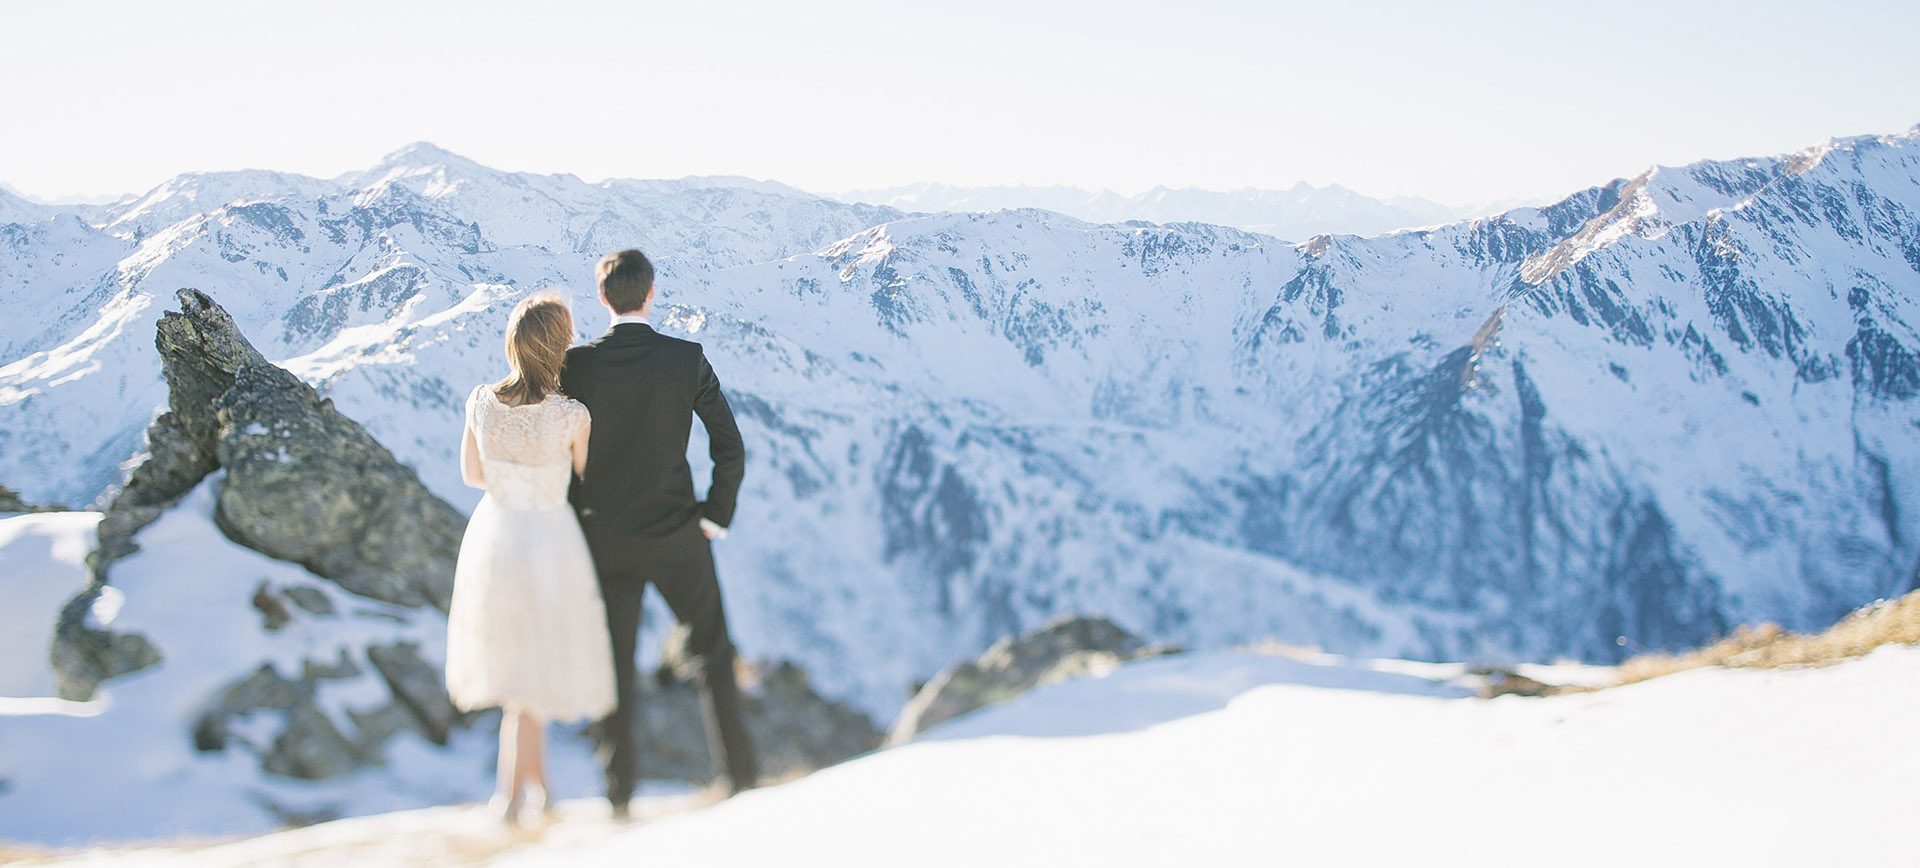 mountain elopement packages - winter and snow